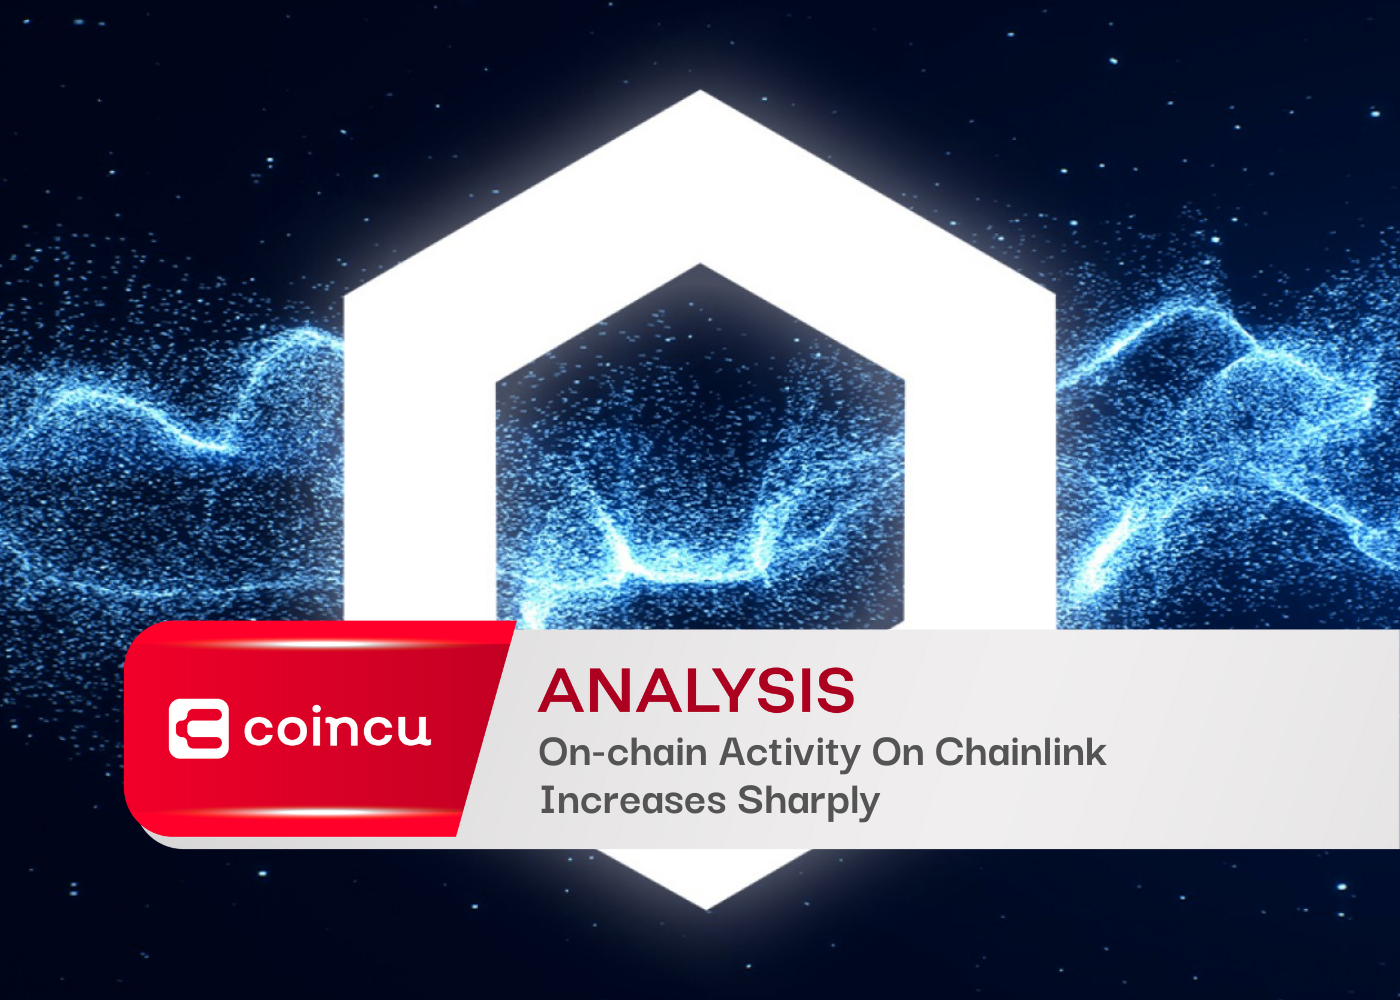 On-chain Activity On Chainlink Increases Sharply